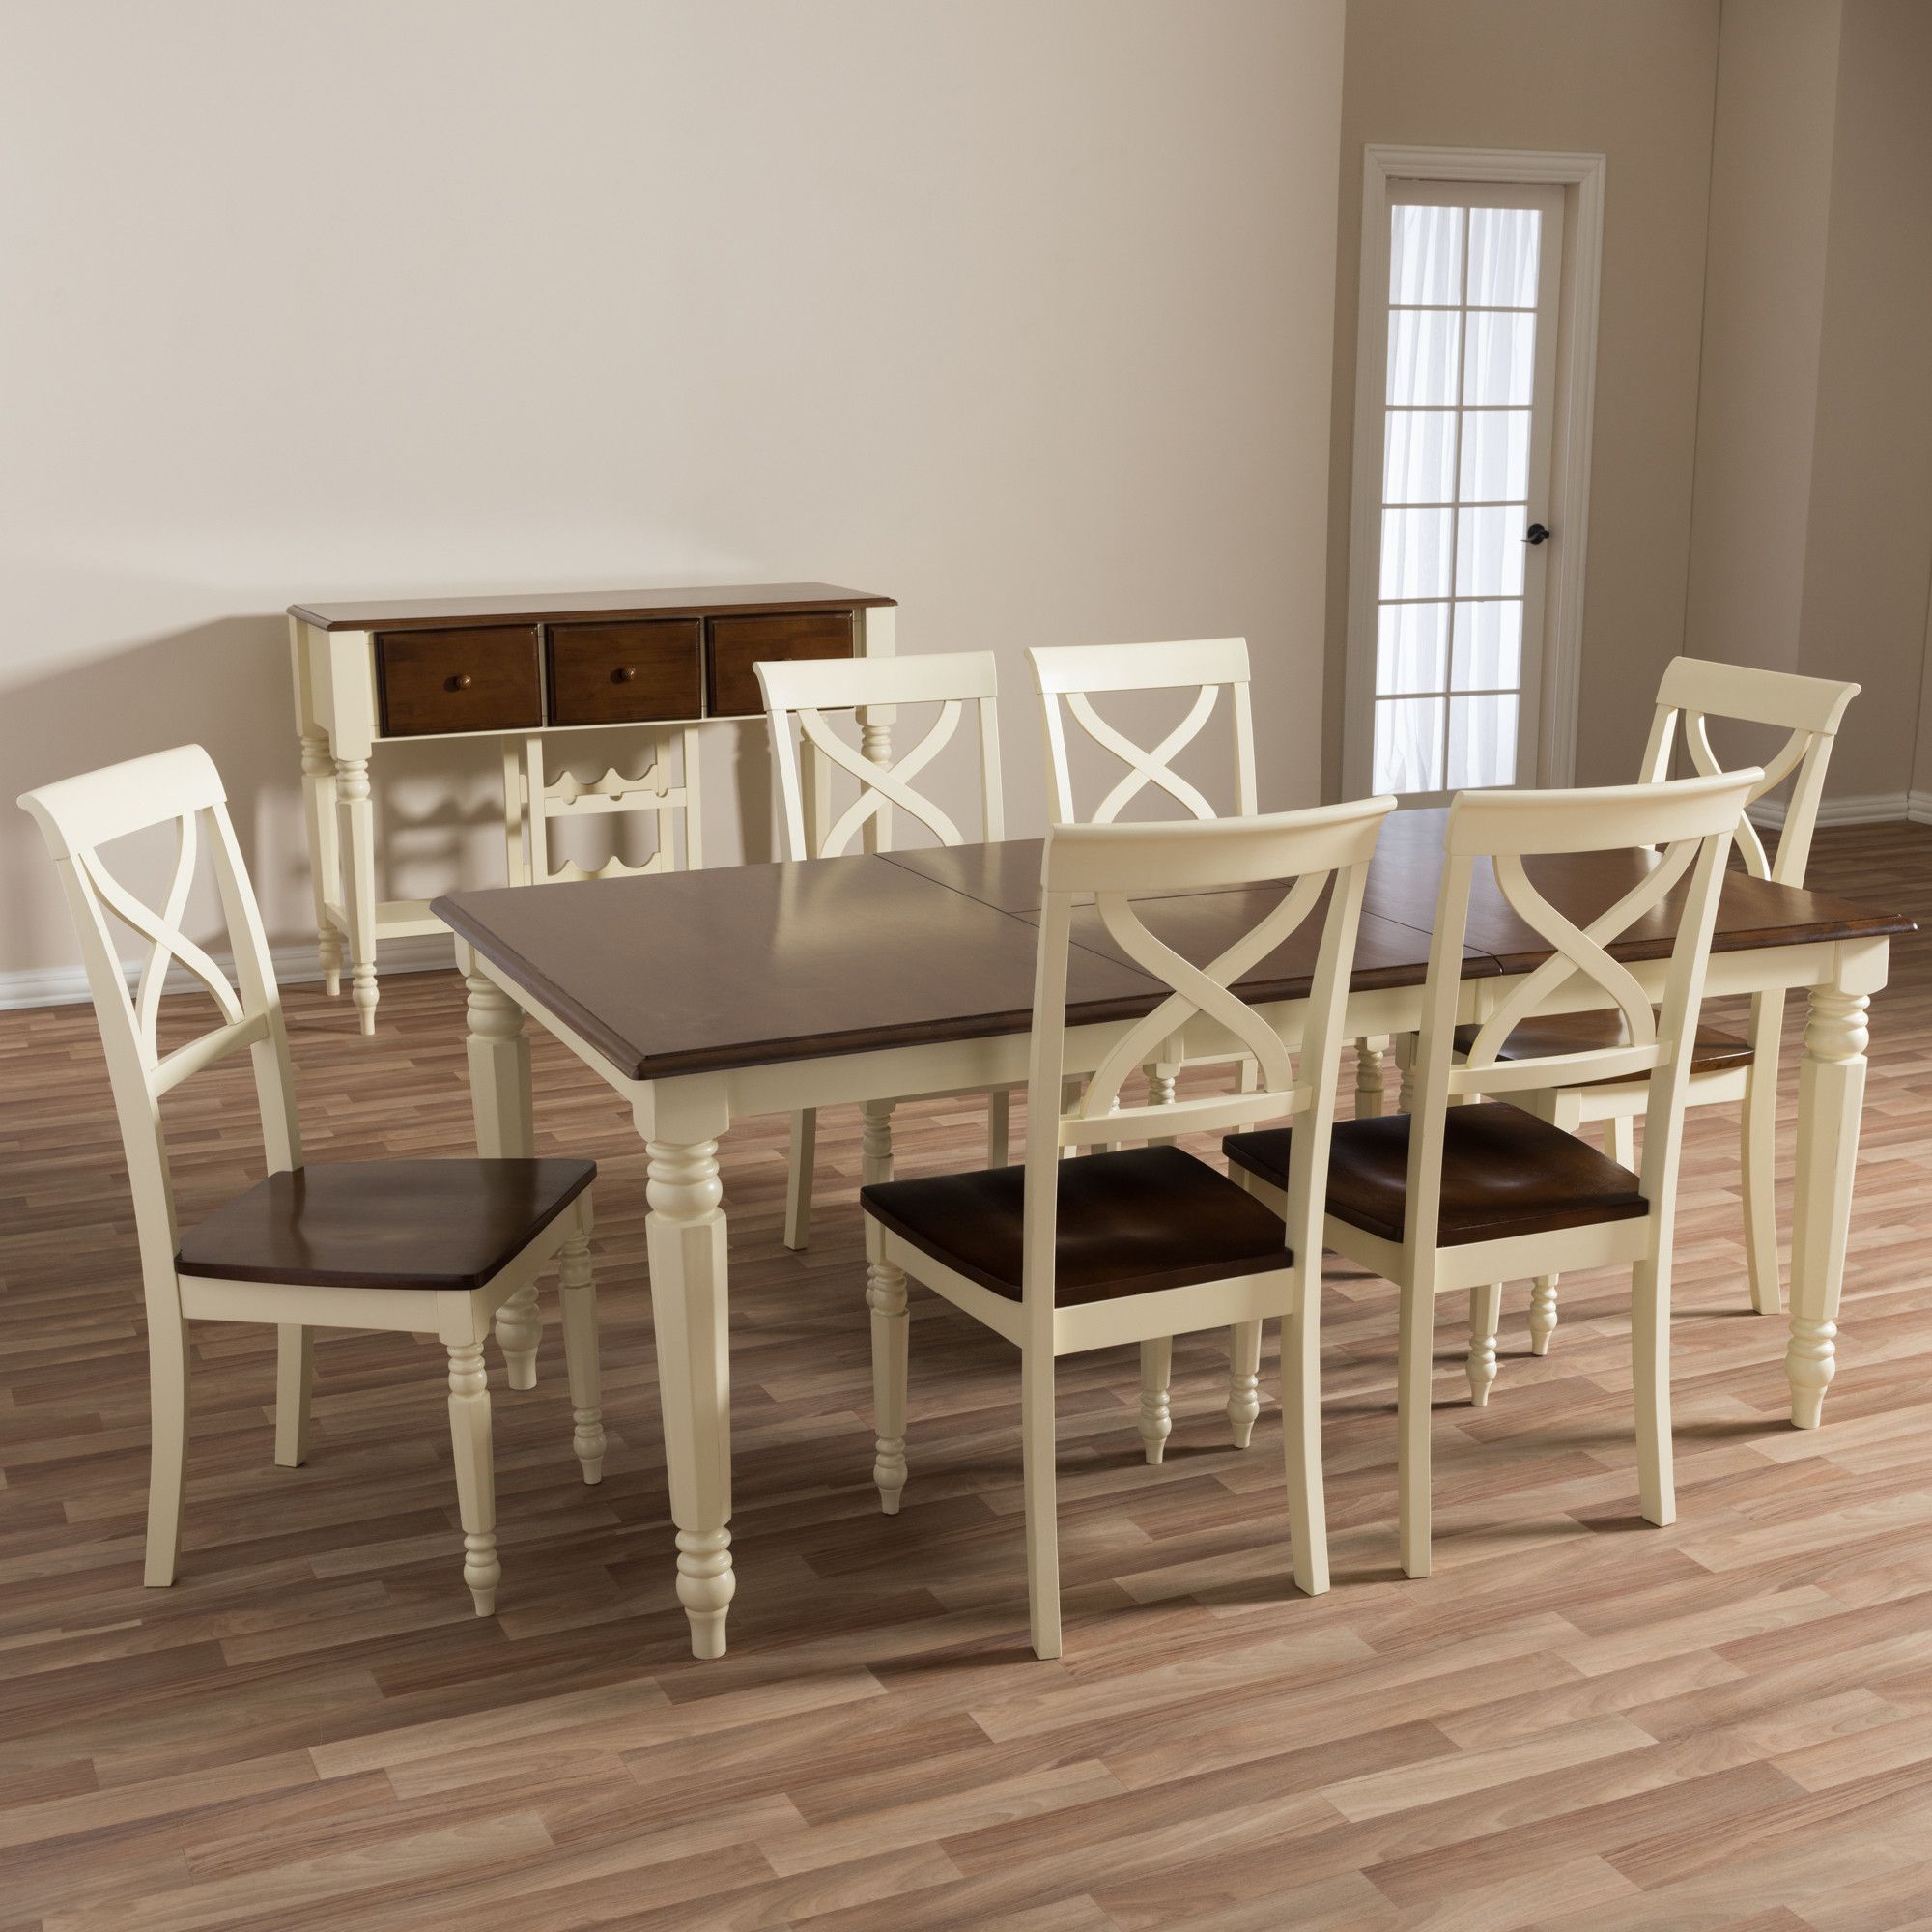 Wholesale Dining Sets. Room Pier One (View 11 of 20)